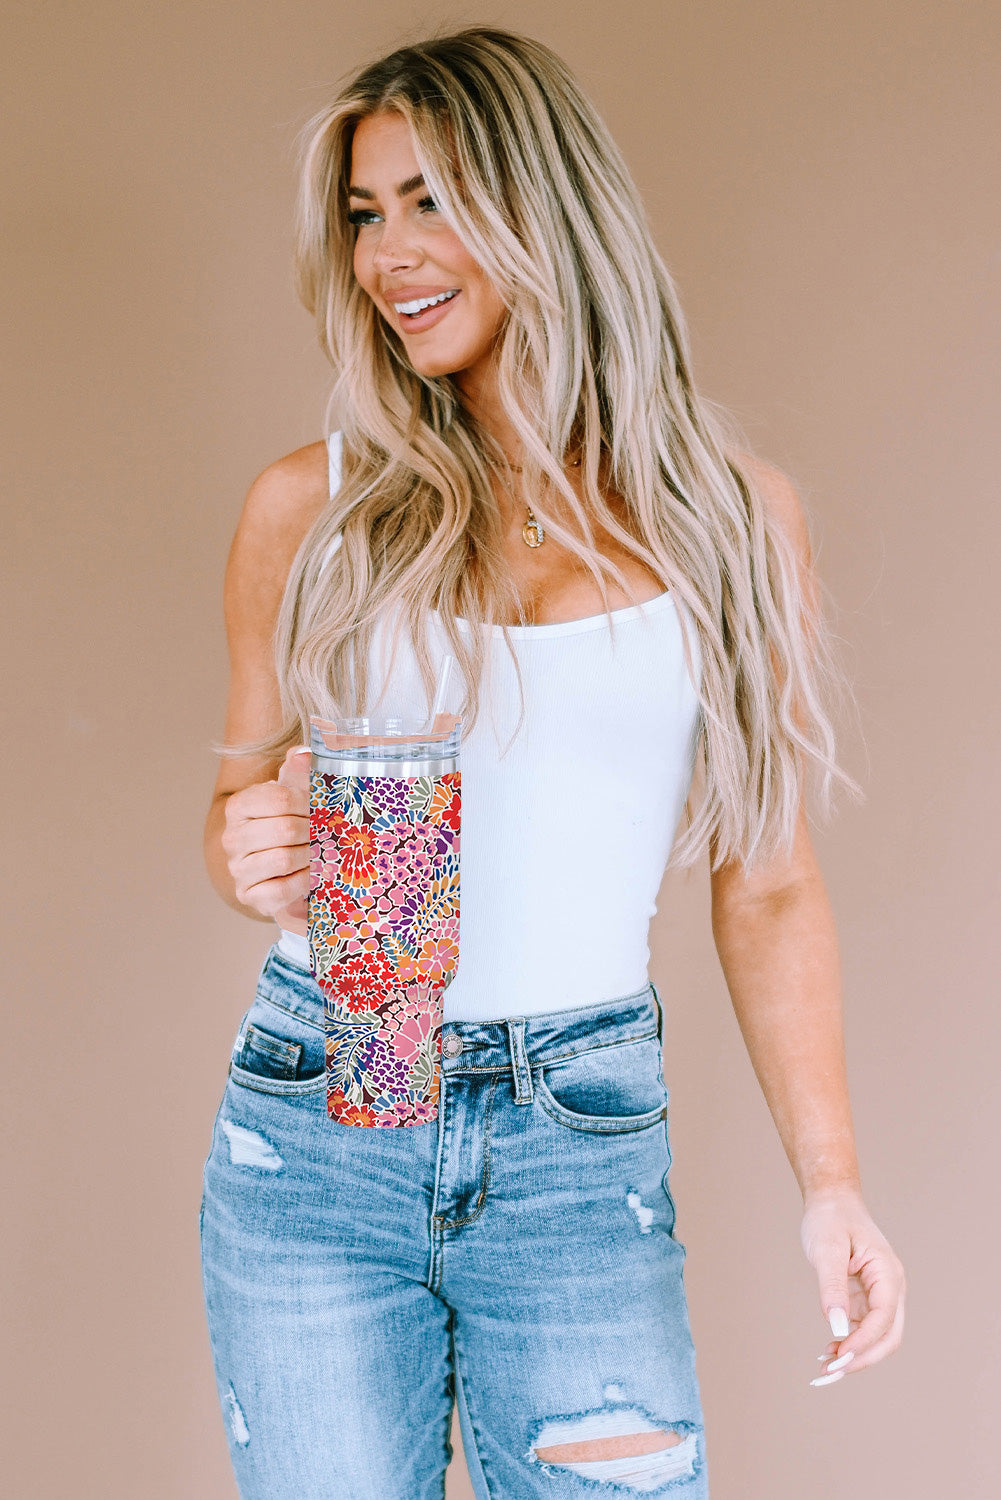 Floral Tumbler with Straw